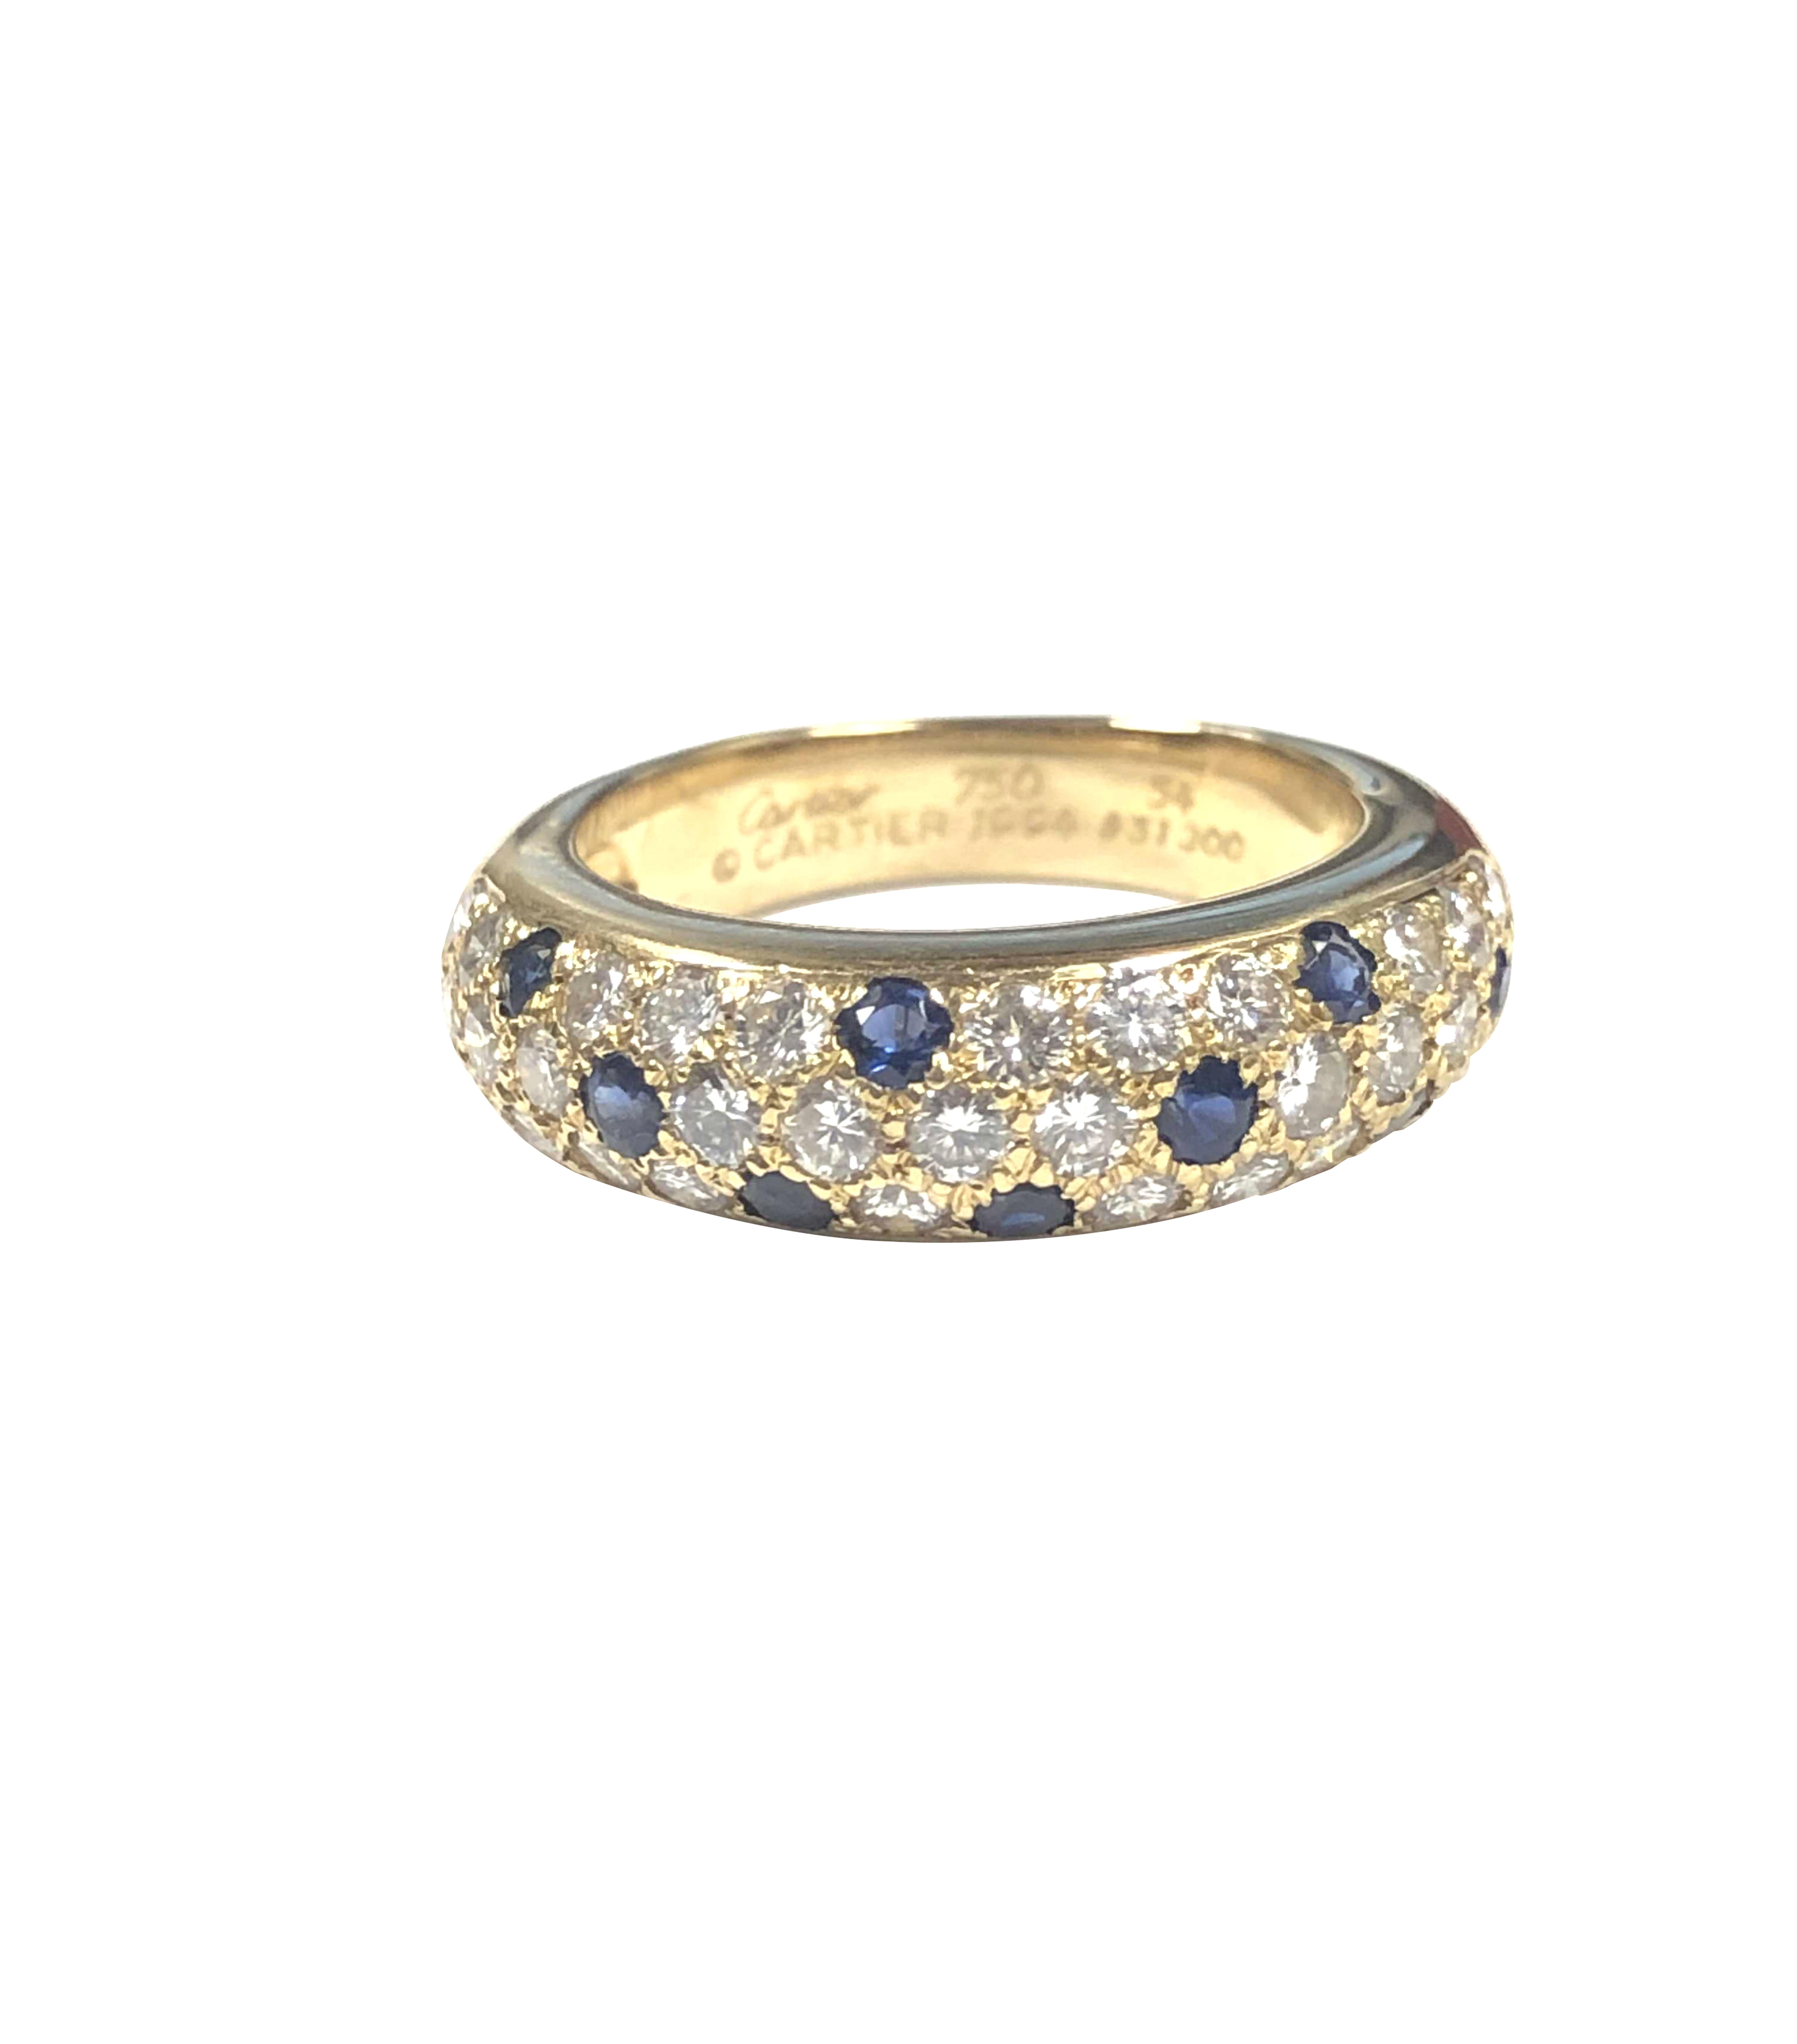 Circa 1990s Cartier 18k yellow Gold Mimi Panther Band Ring, set with Round Brilliant cut Diamonds totaling 1 carat and Further set with Round Sapphires. measuring 7/8 inch in length across the top and 1/4 inch wide. Finger size 7 ( 54 European ).